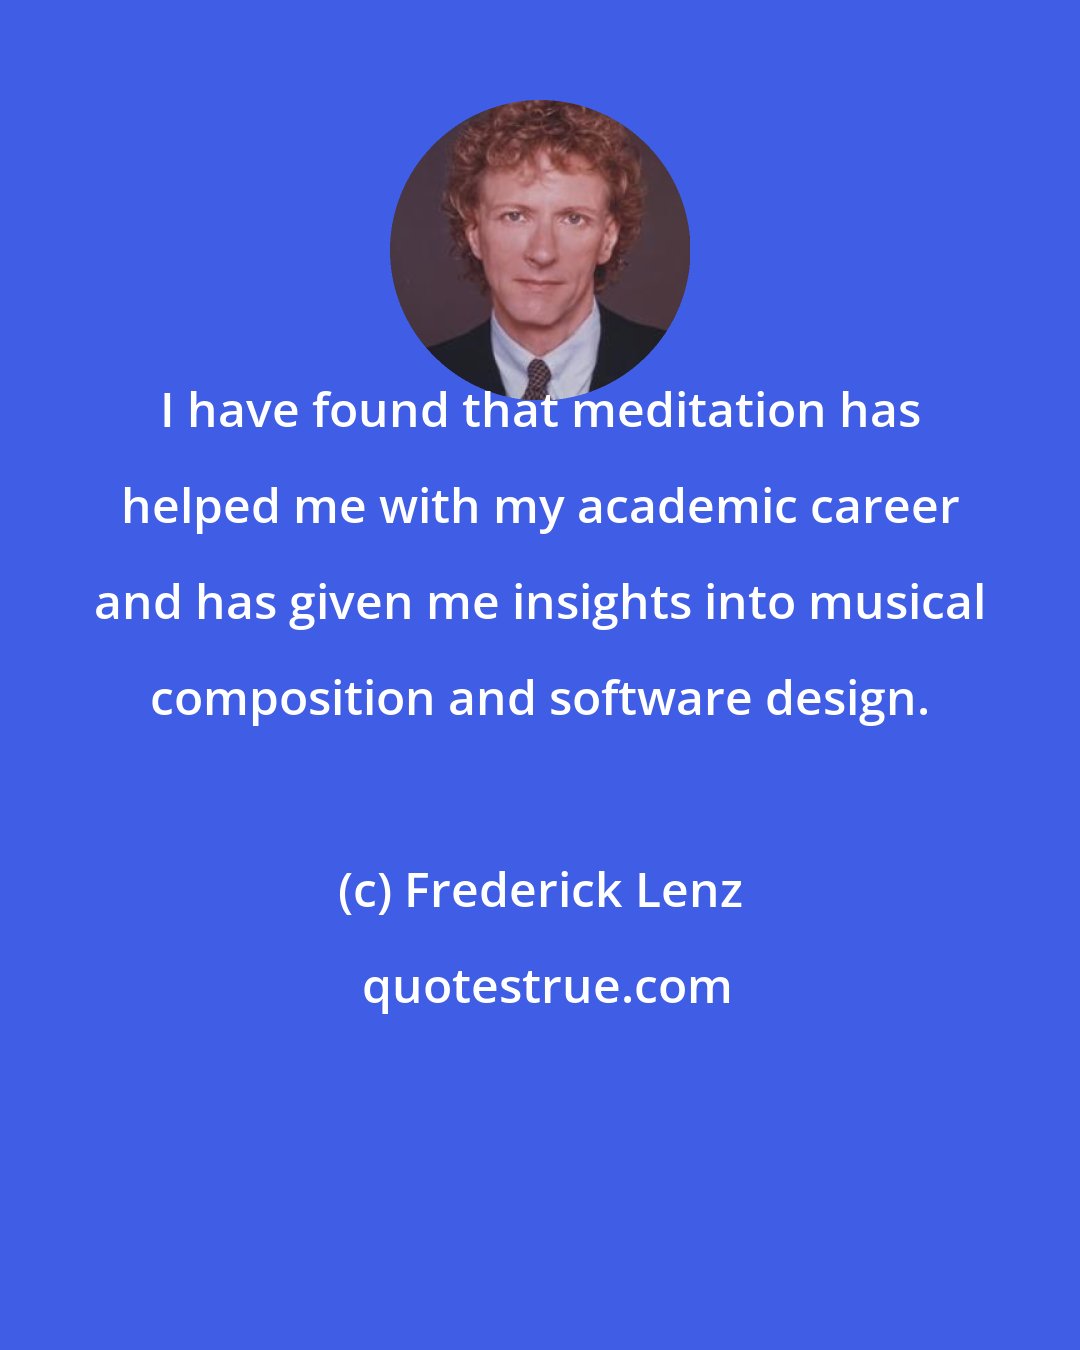 Frederick Lenz: I have found that meditation has helped me with my academic career and has given me insights into musical composition and software design.